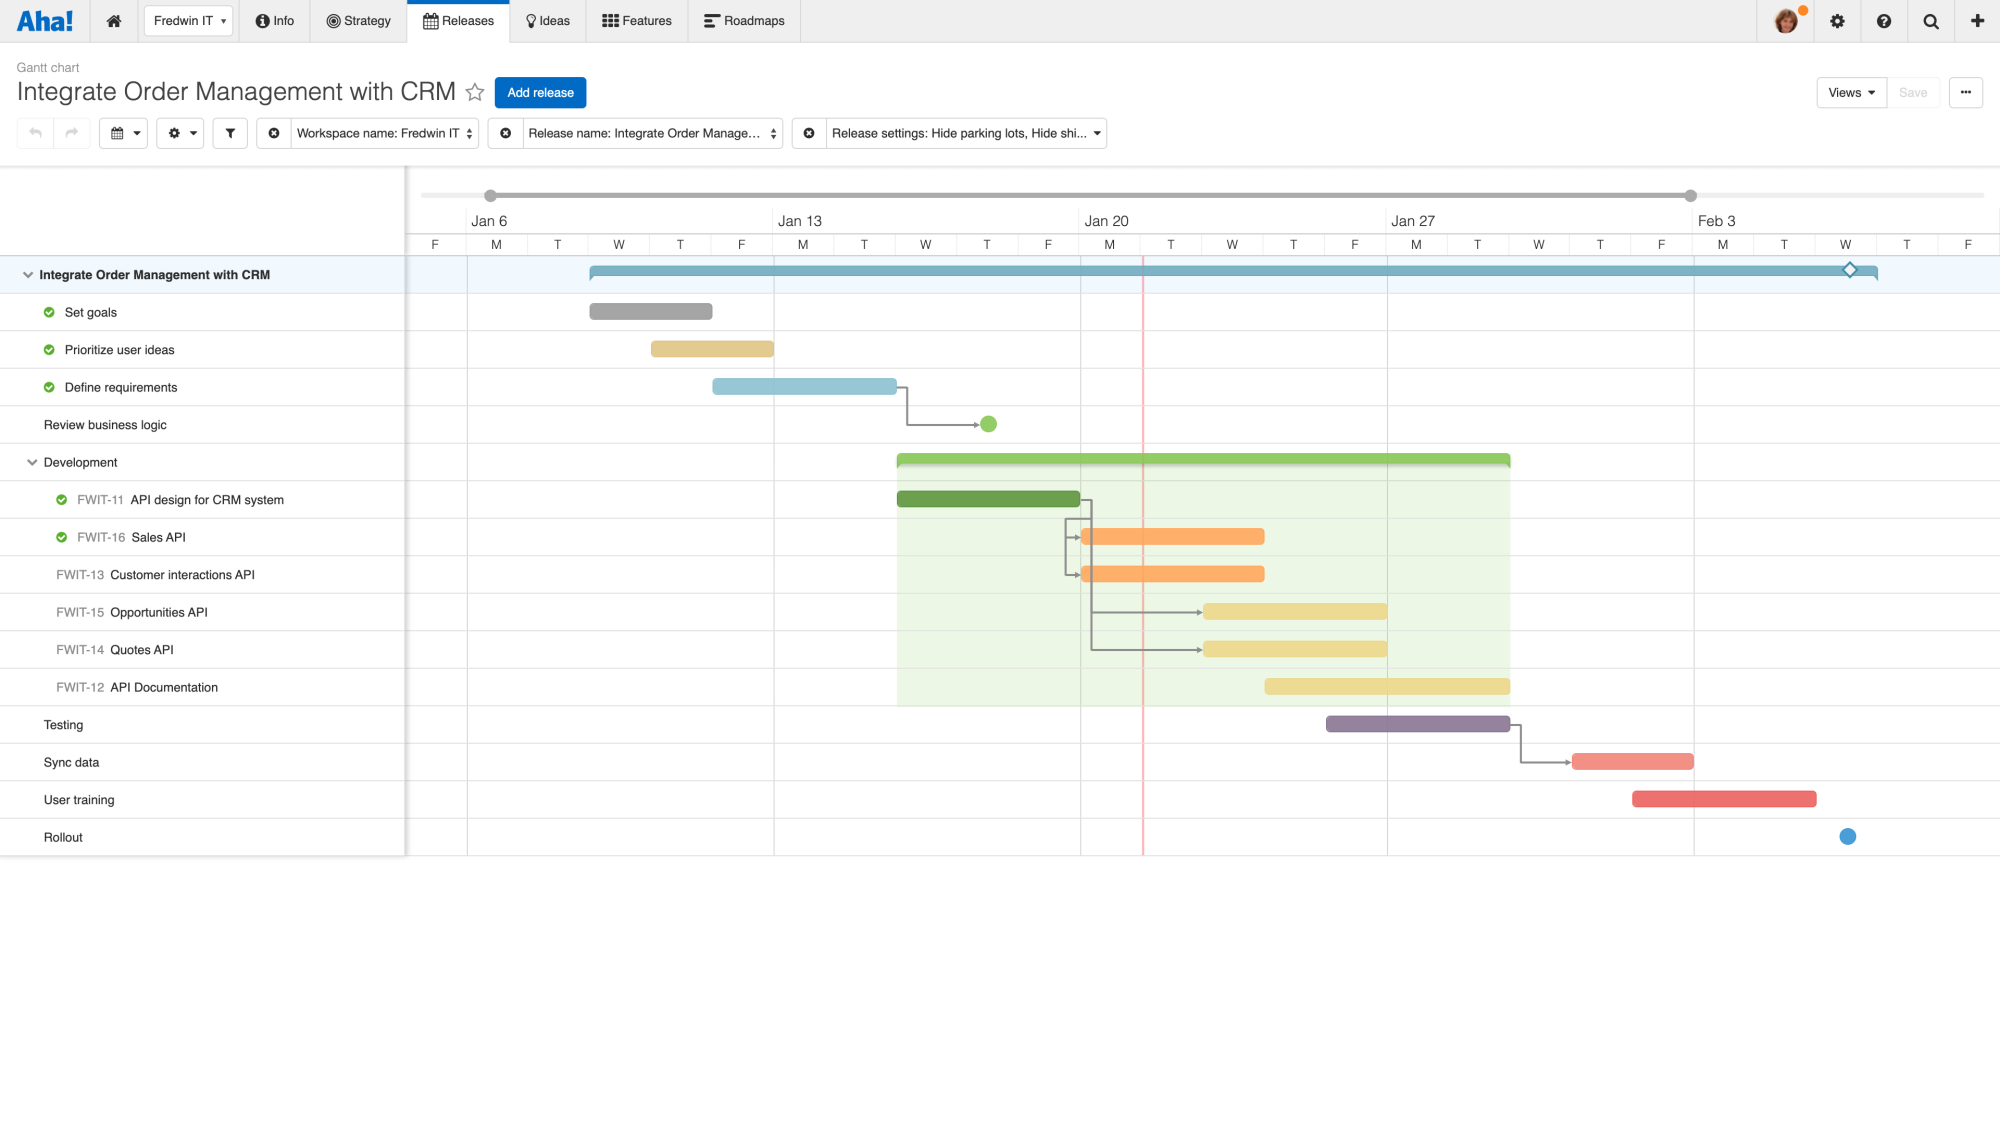 Gantt chart for the IT workspace type.